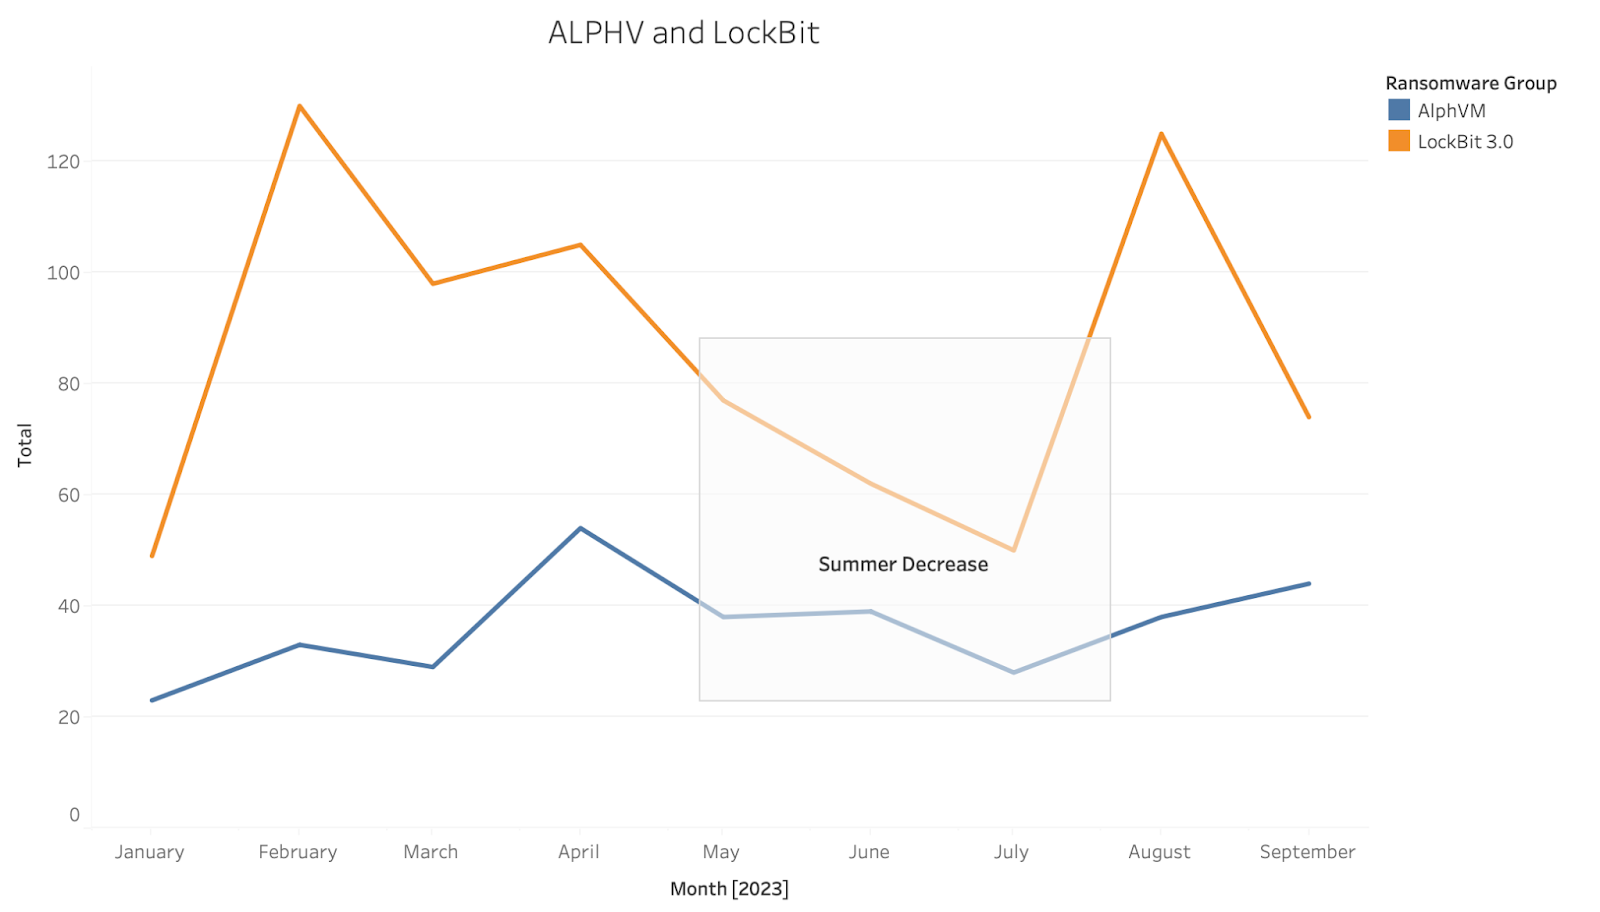 [LINE GRAPH] ALPHV and LockBit Ransomware Attacks from Jan. 2023 - Sep. 2023